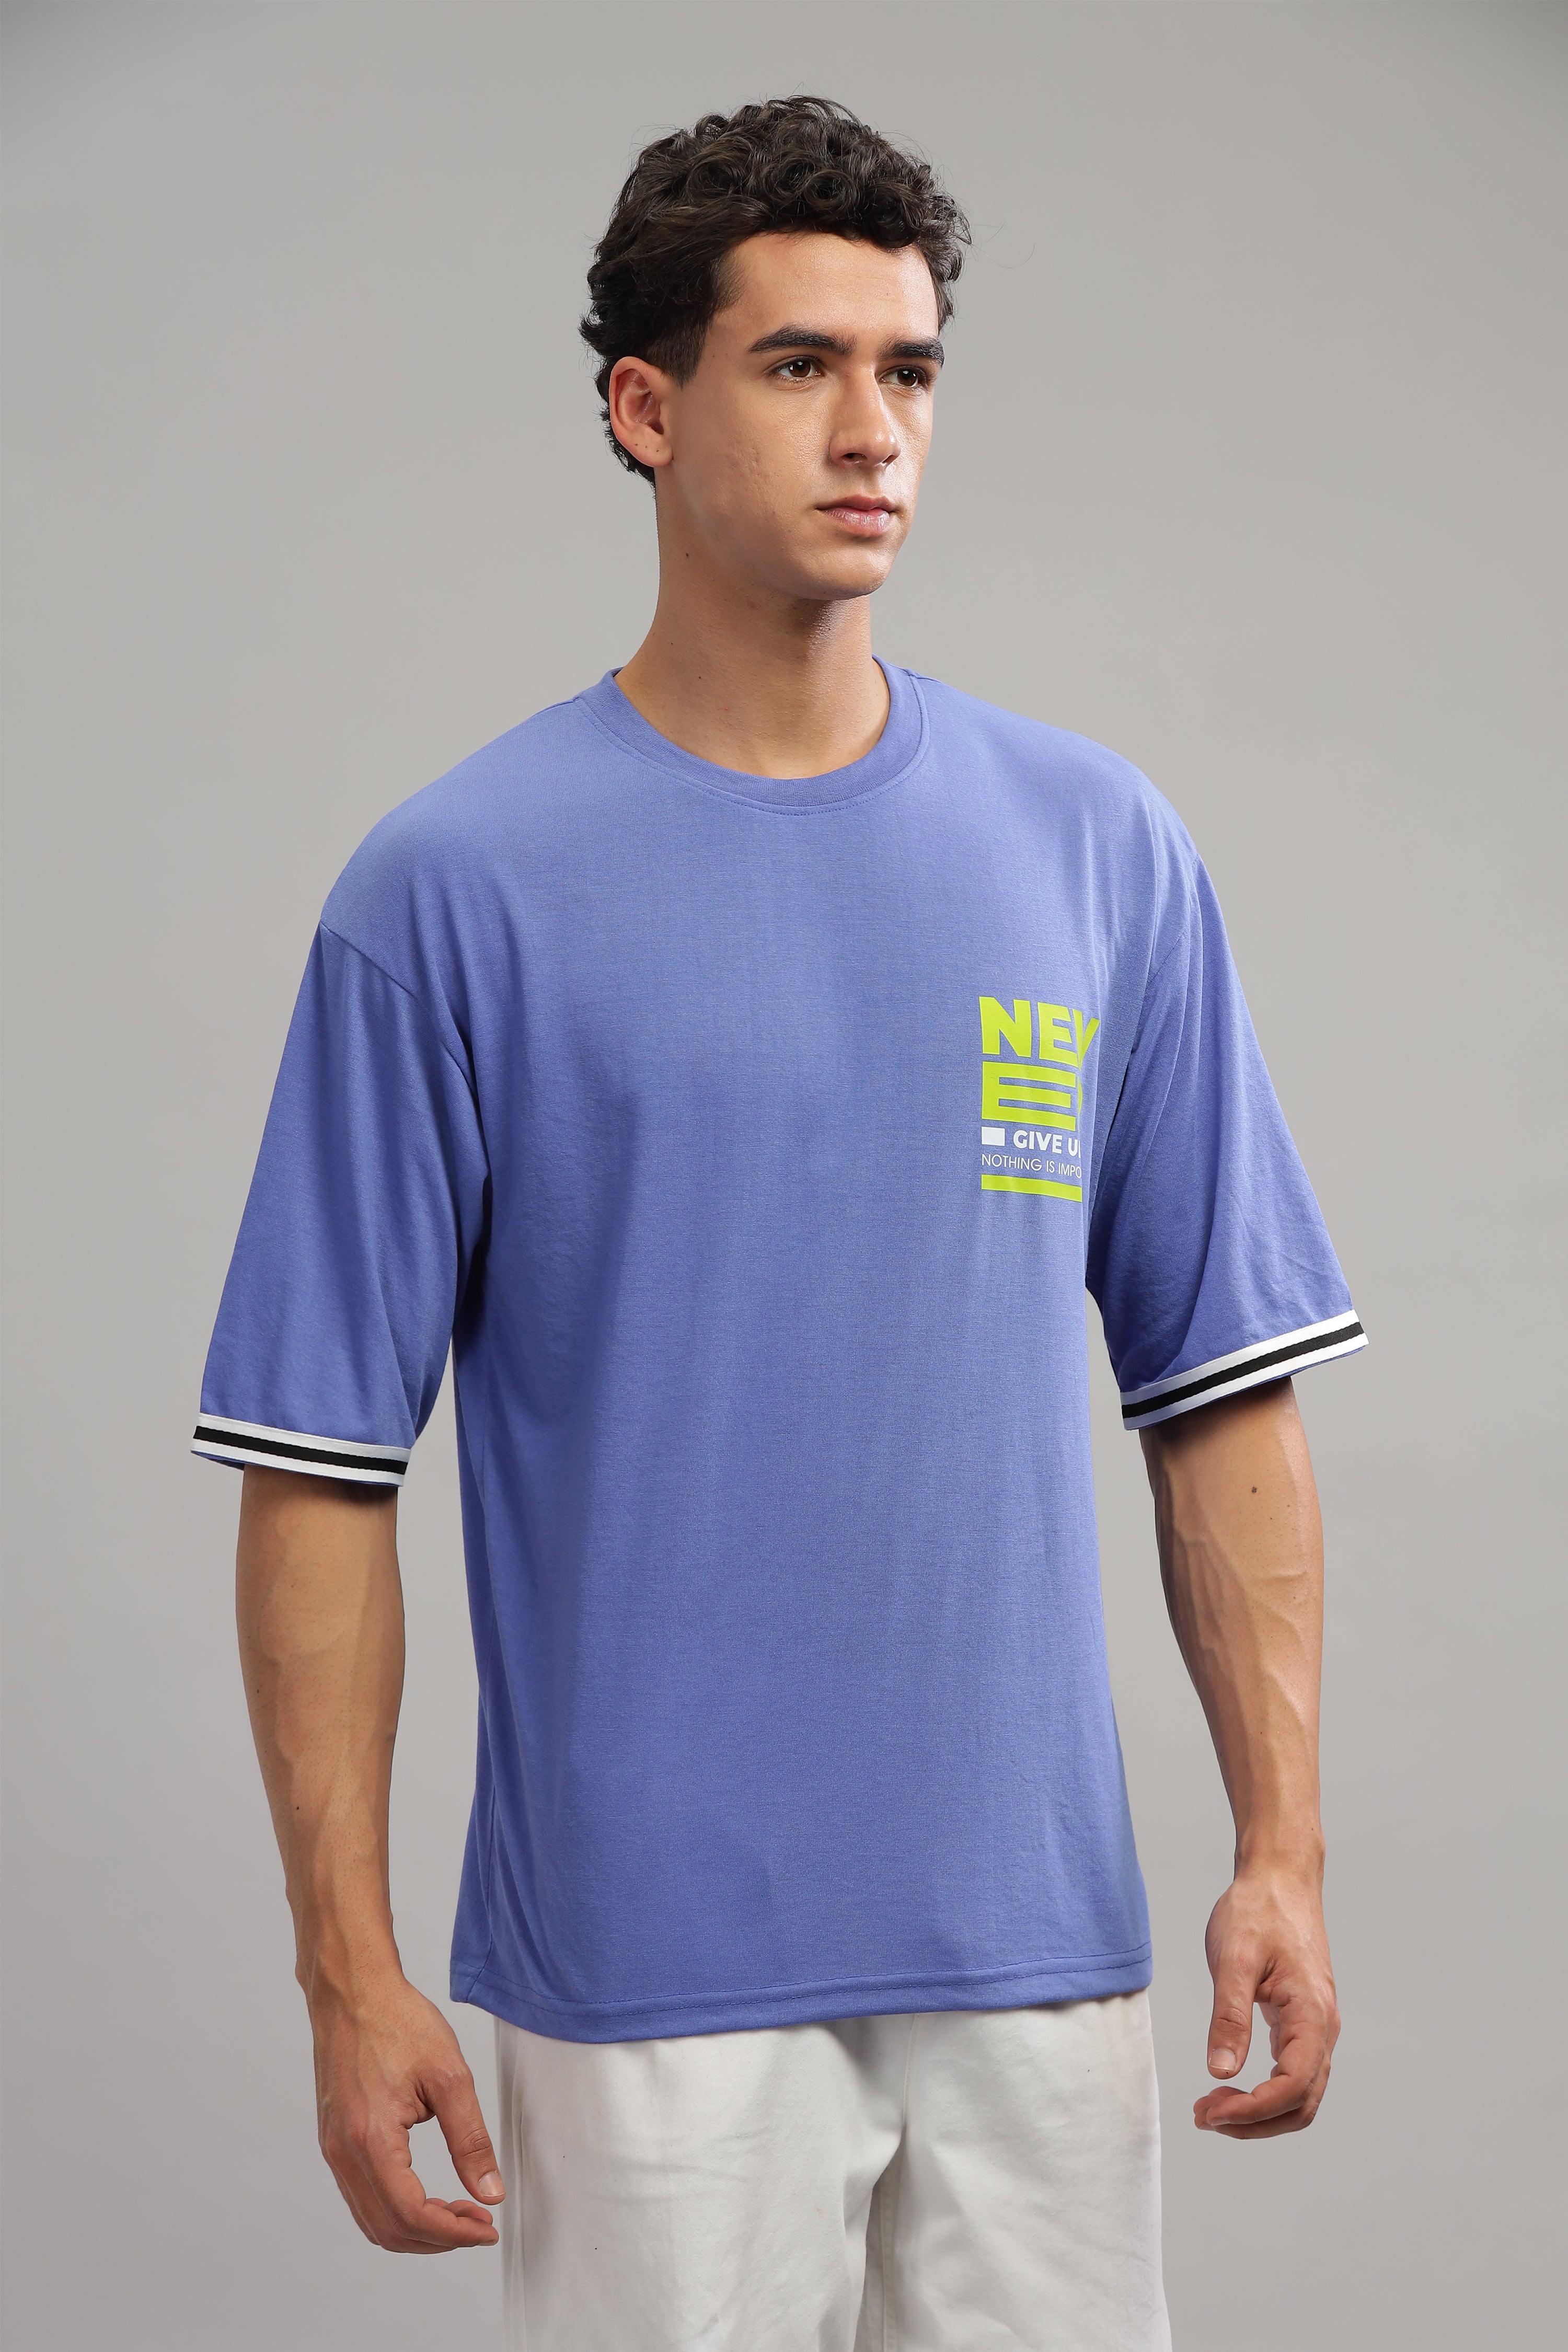 Blue Oversized "Never Give up" T-Shirt